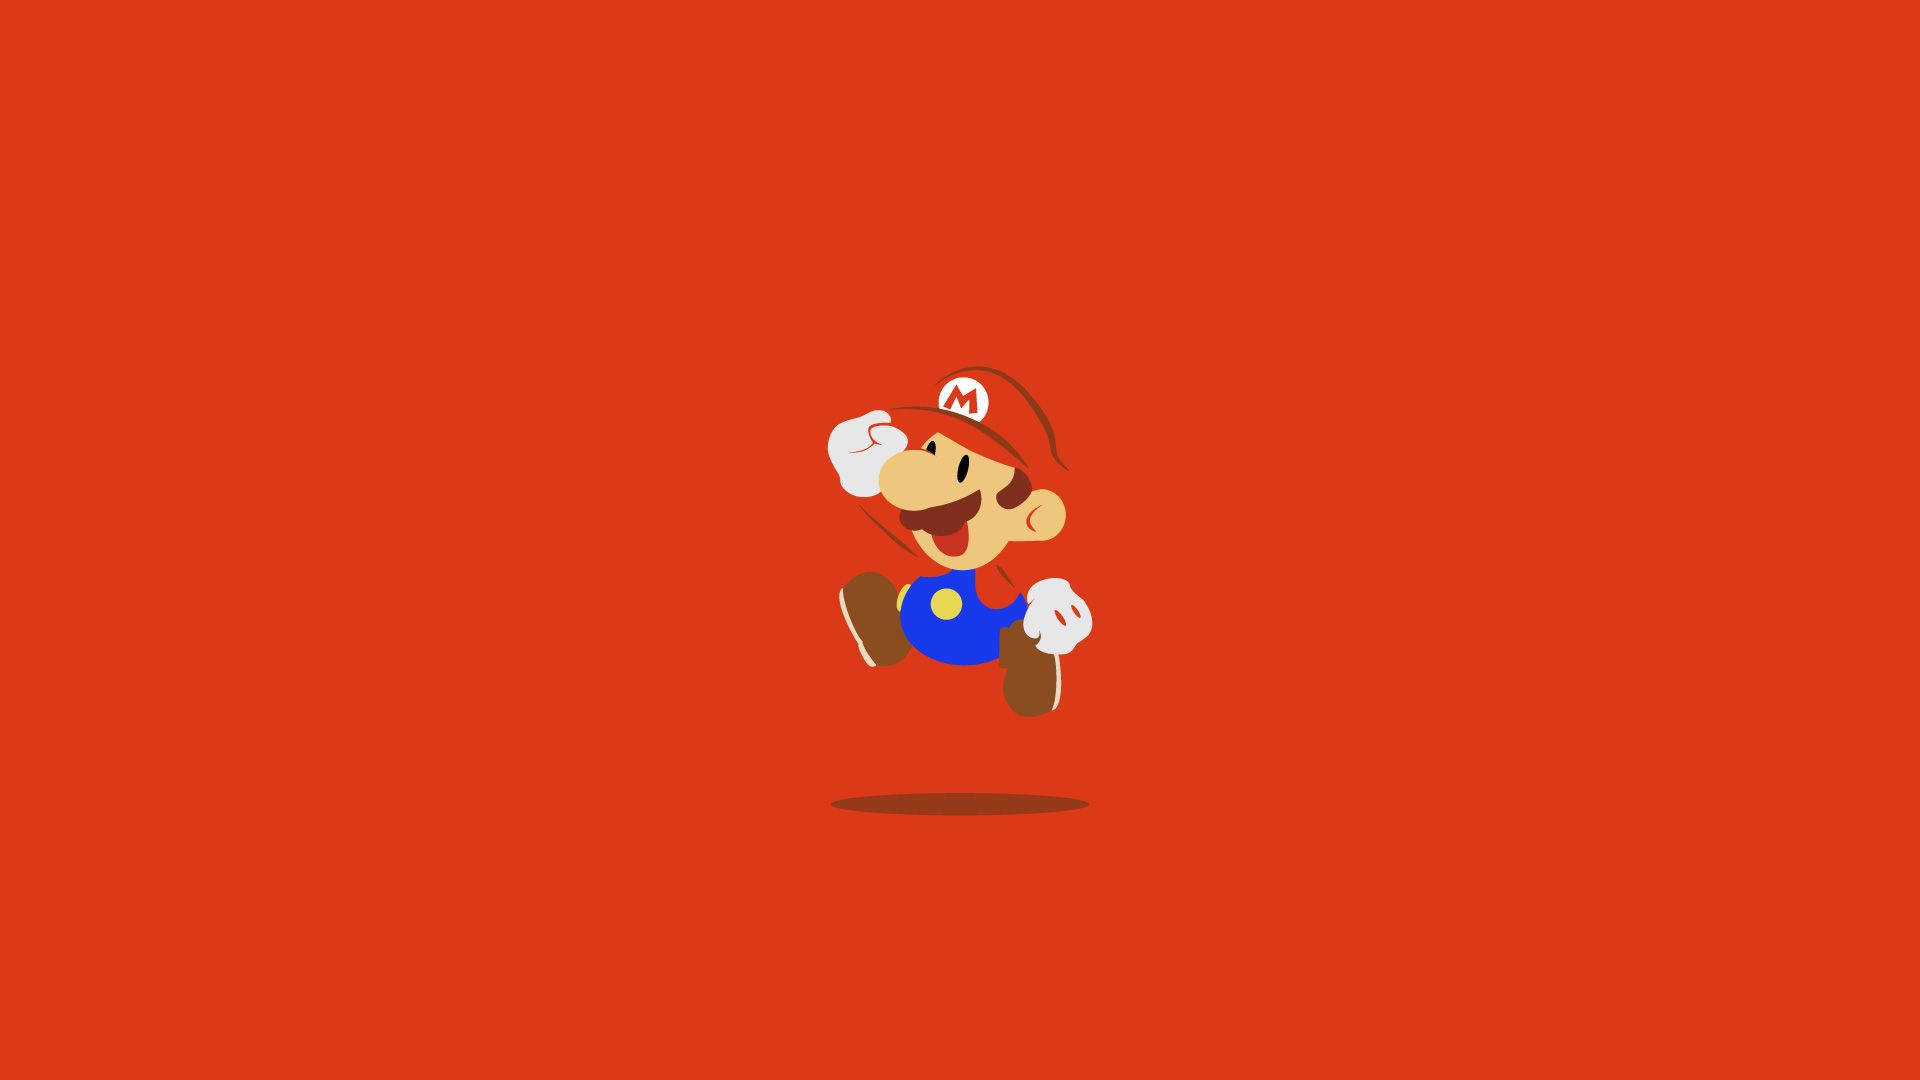 A Nintendo Mario Running On A Red Background Background